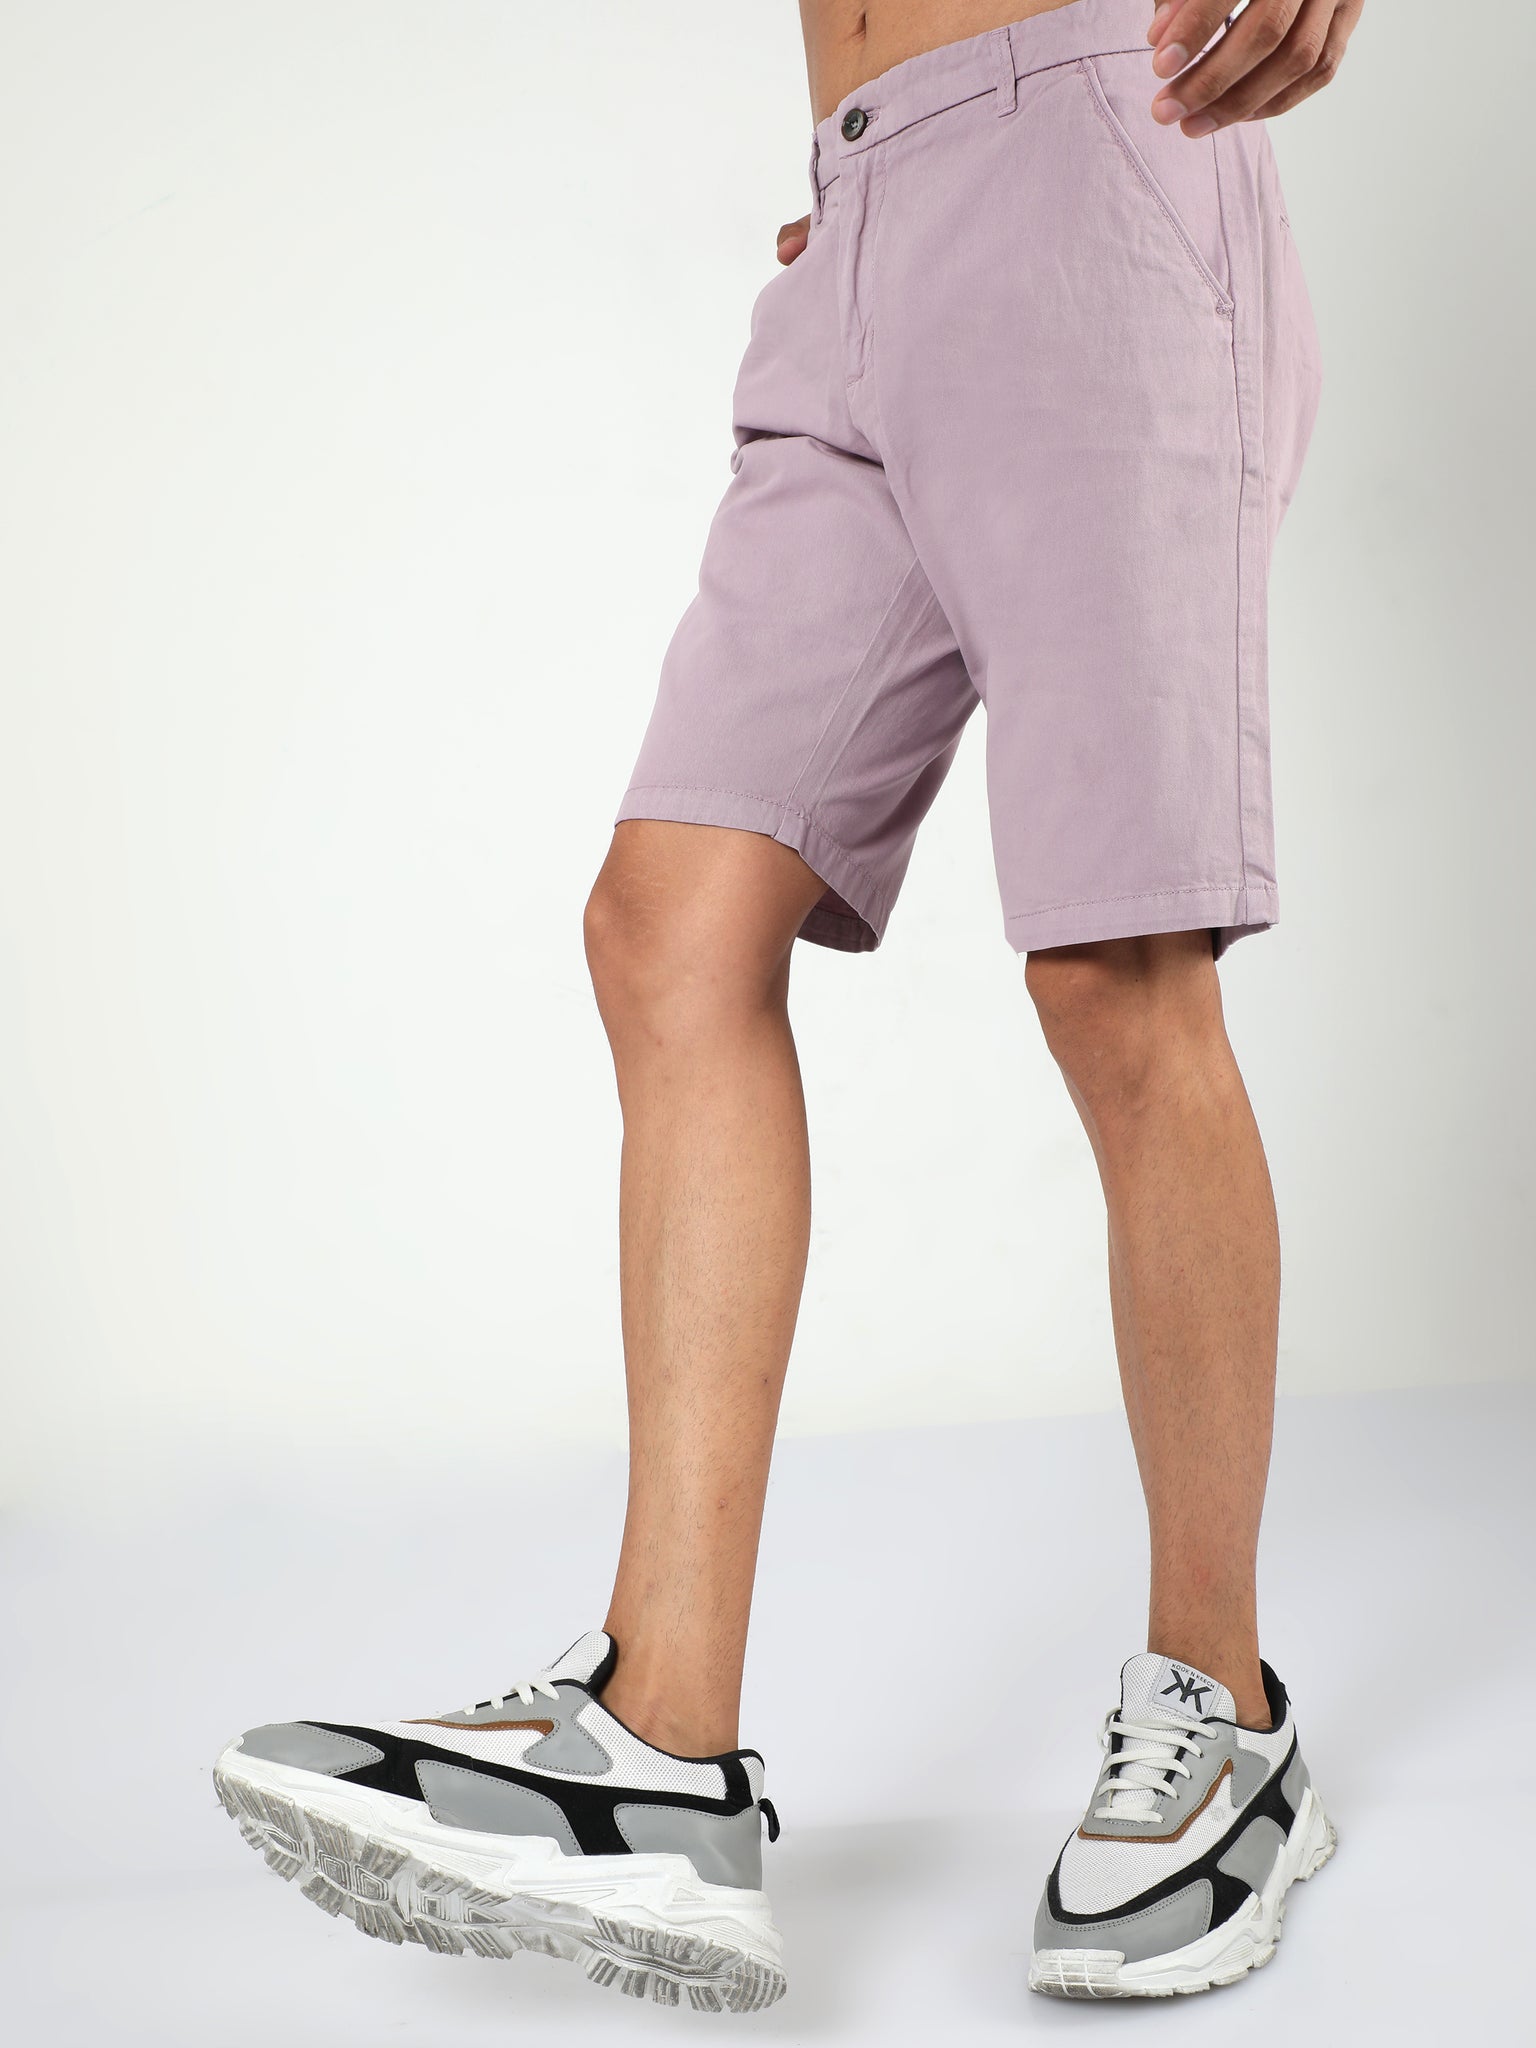 French Lilac Shorts for Men